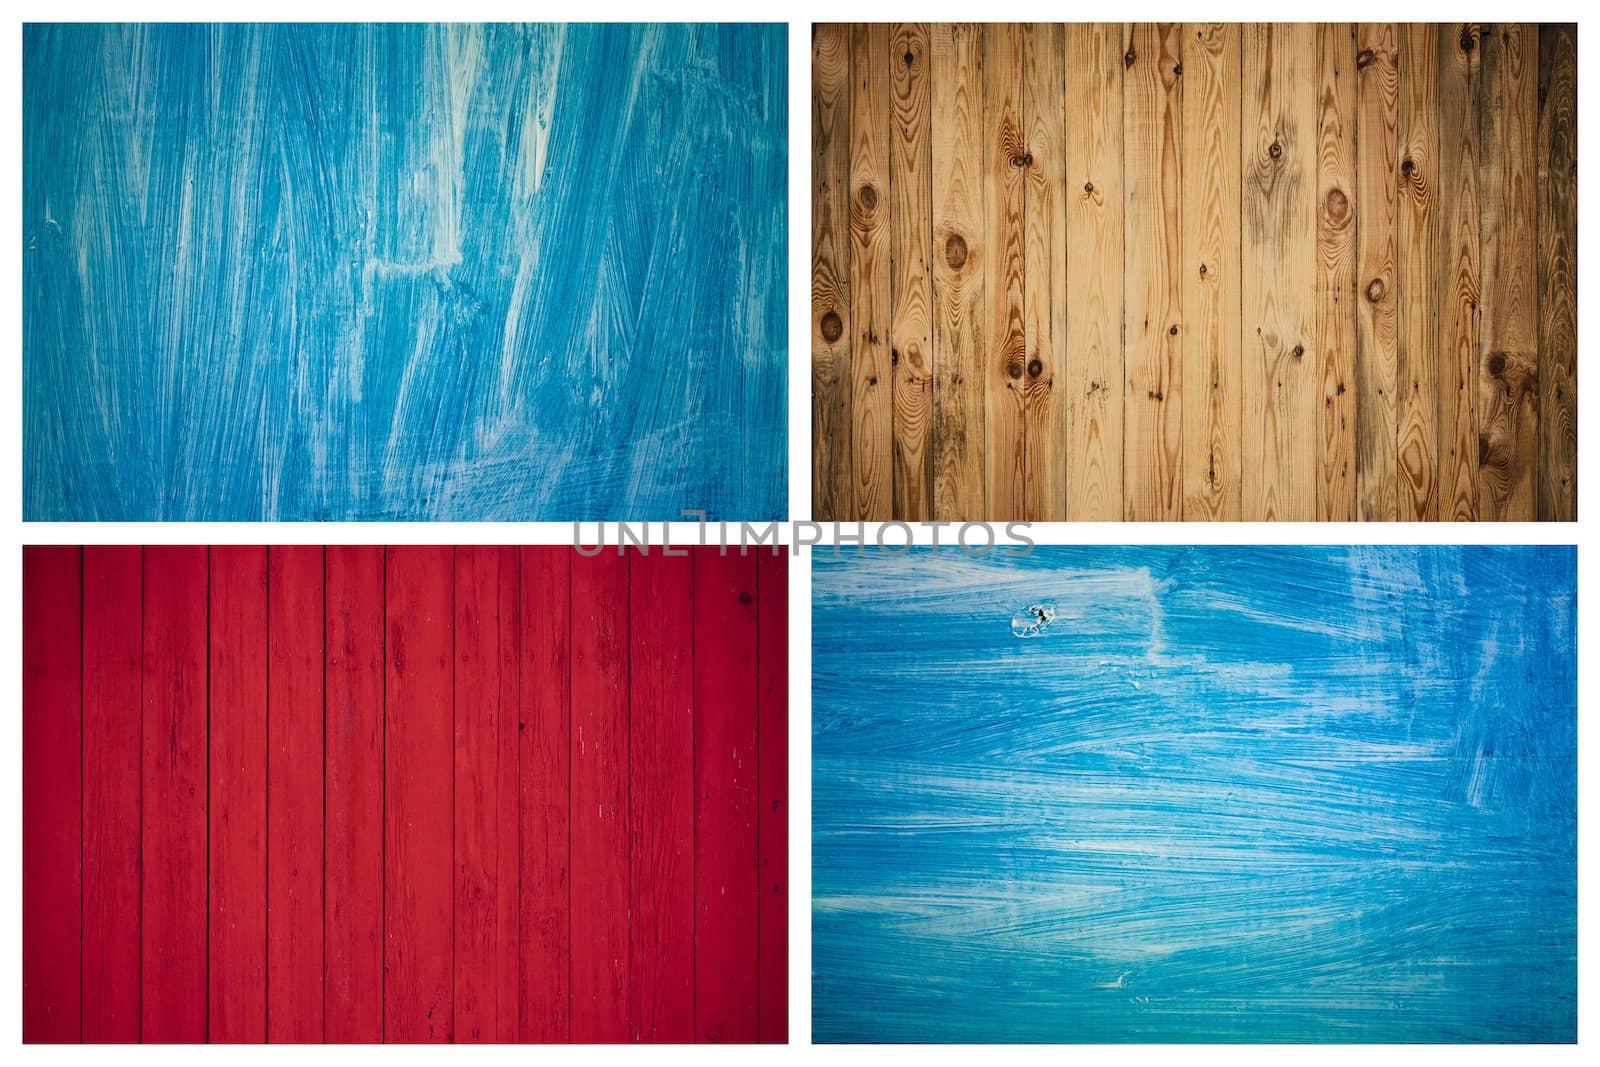 The Grunge Wood Texture With Natural Patterns. by ryhor